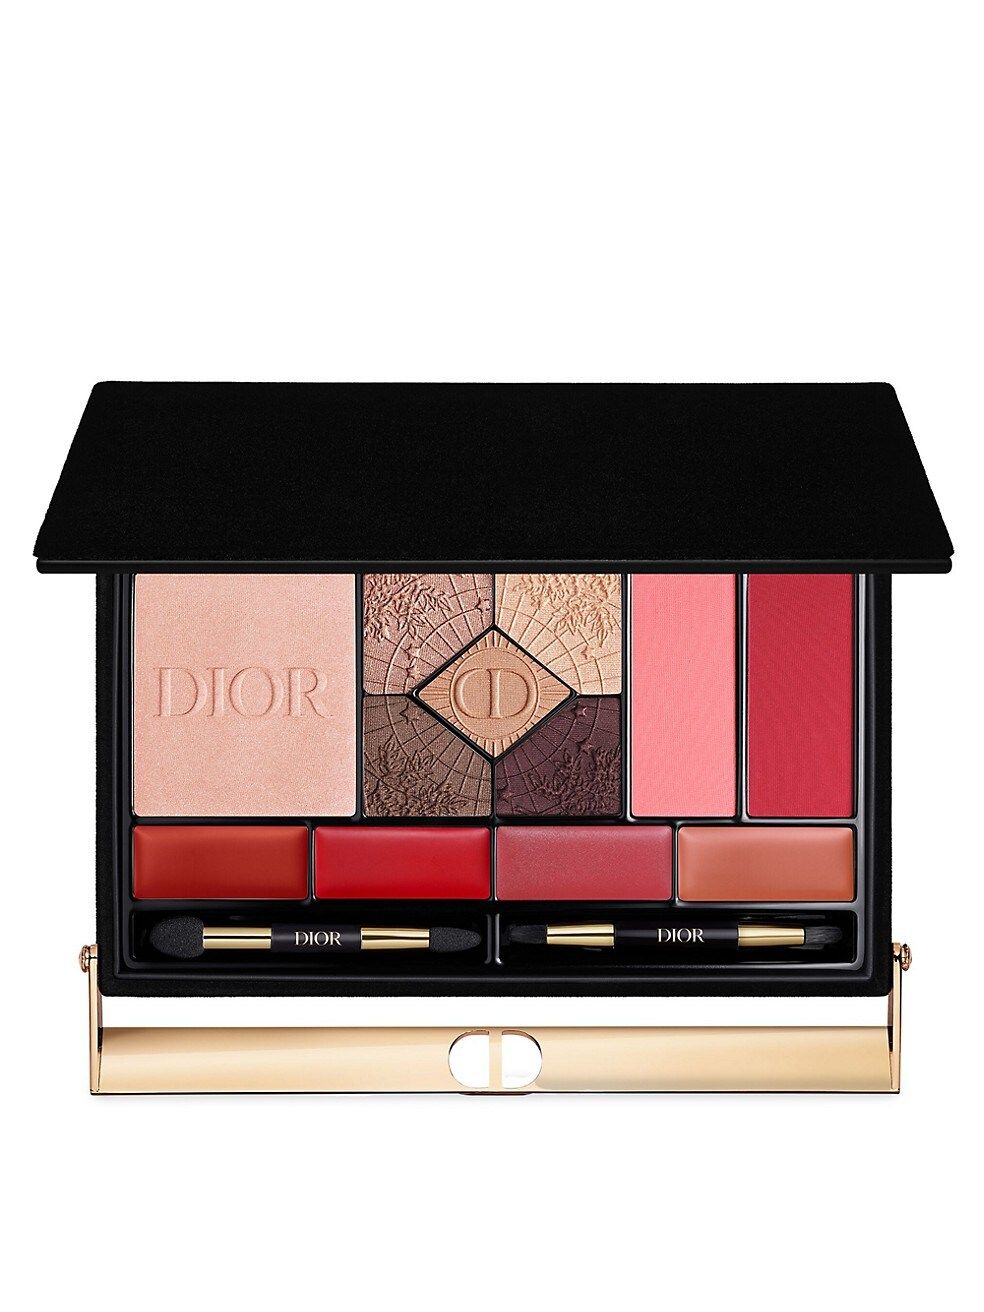 Dior All-In-One Face, Lip & Eye Makeup Palette | Saks Fifth Avenue